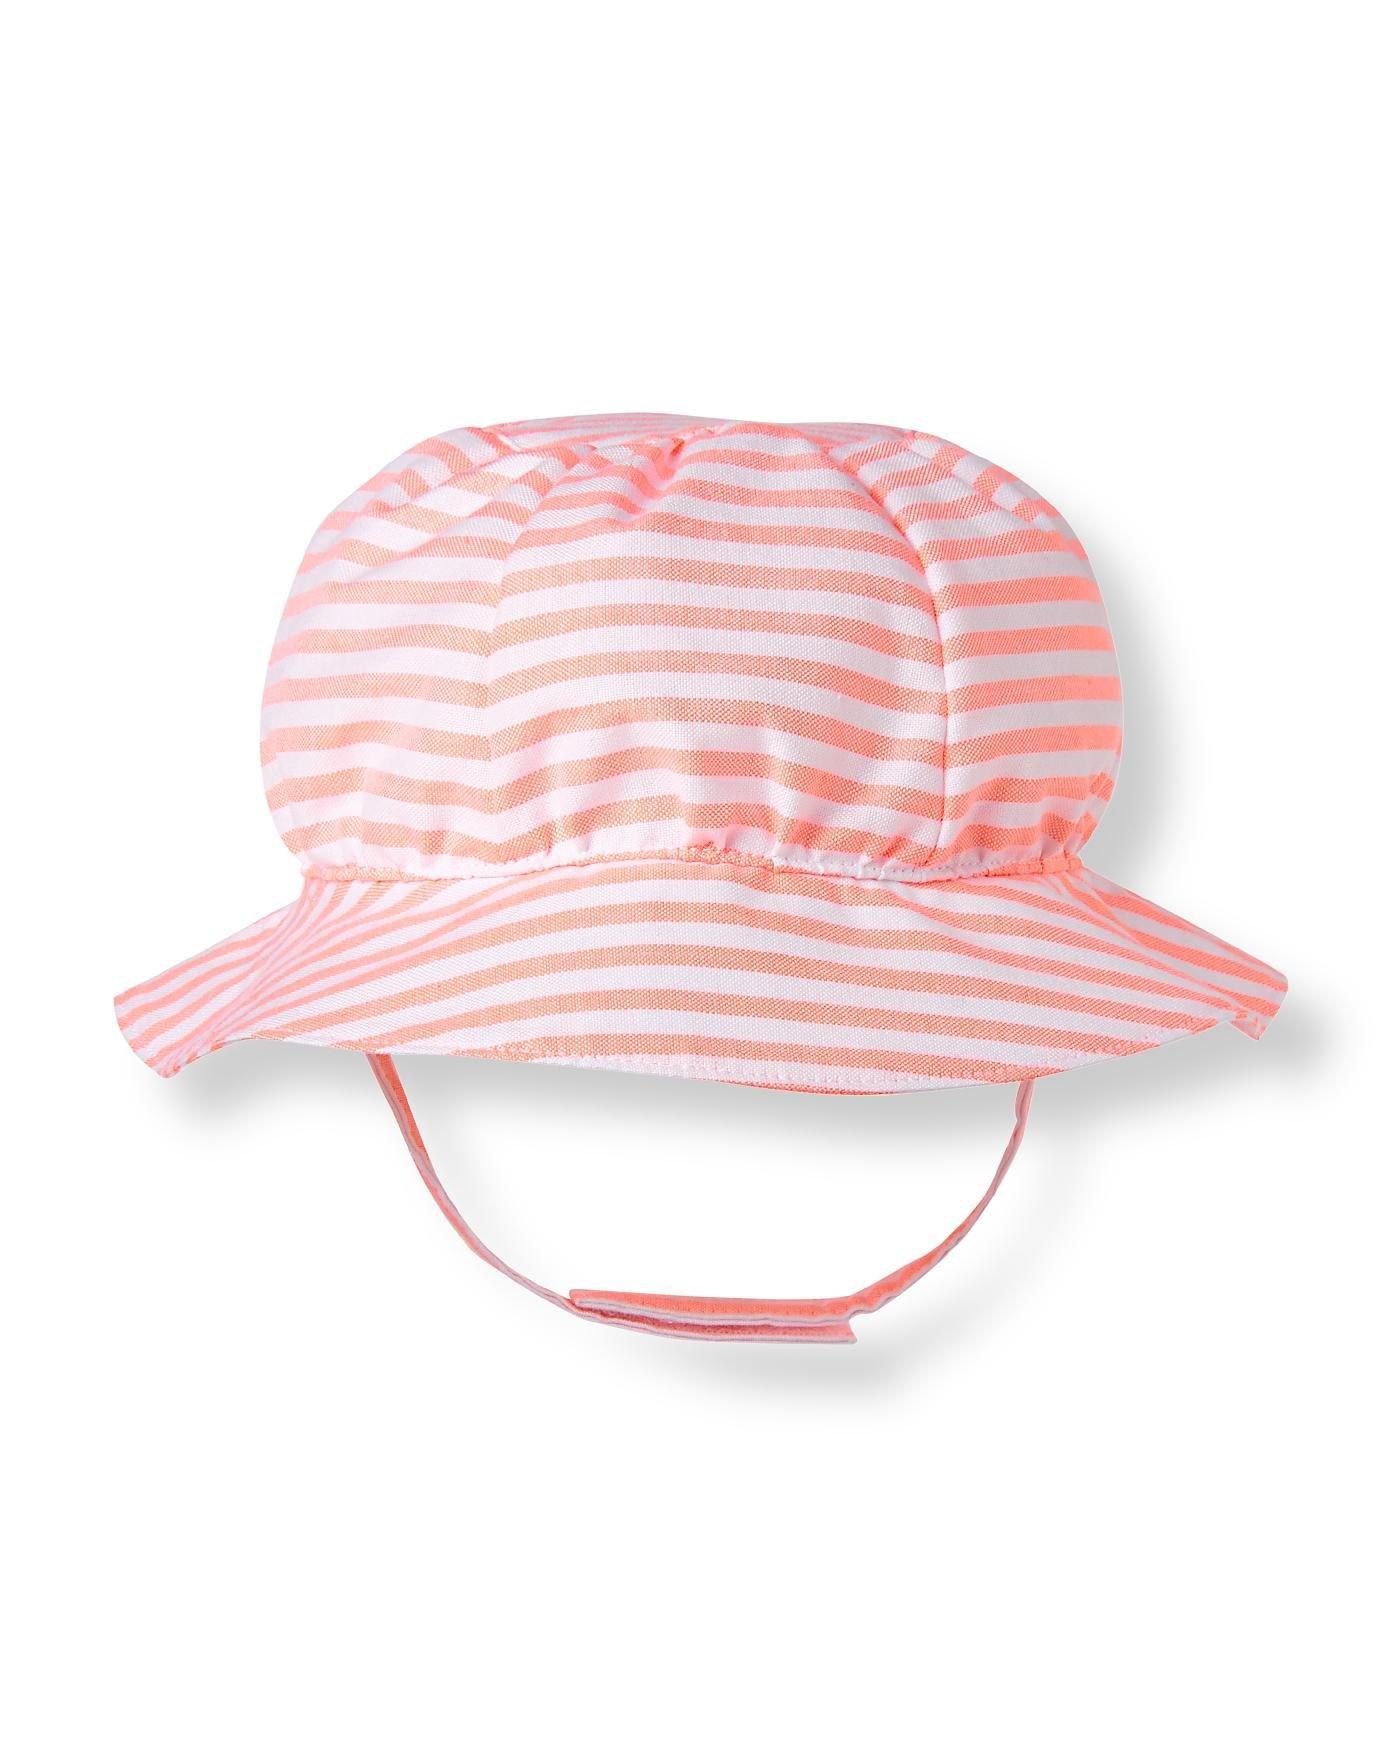 Striped Sunhat image number 0